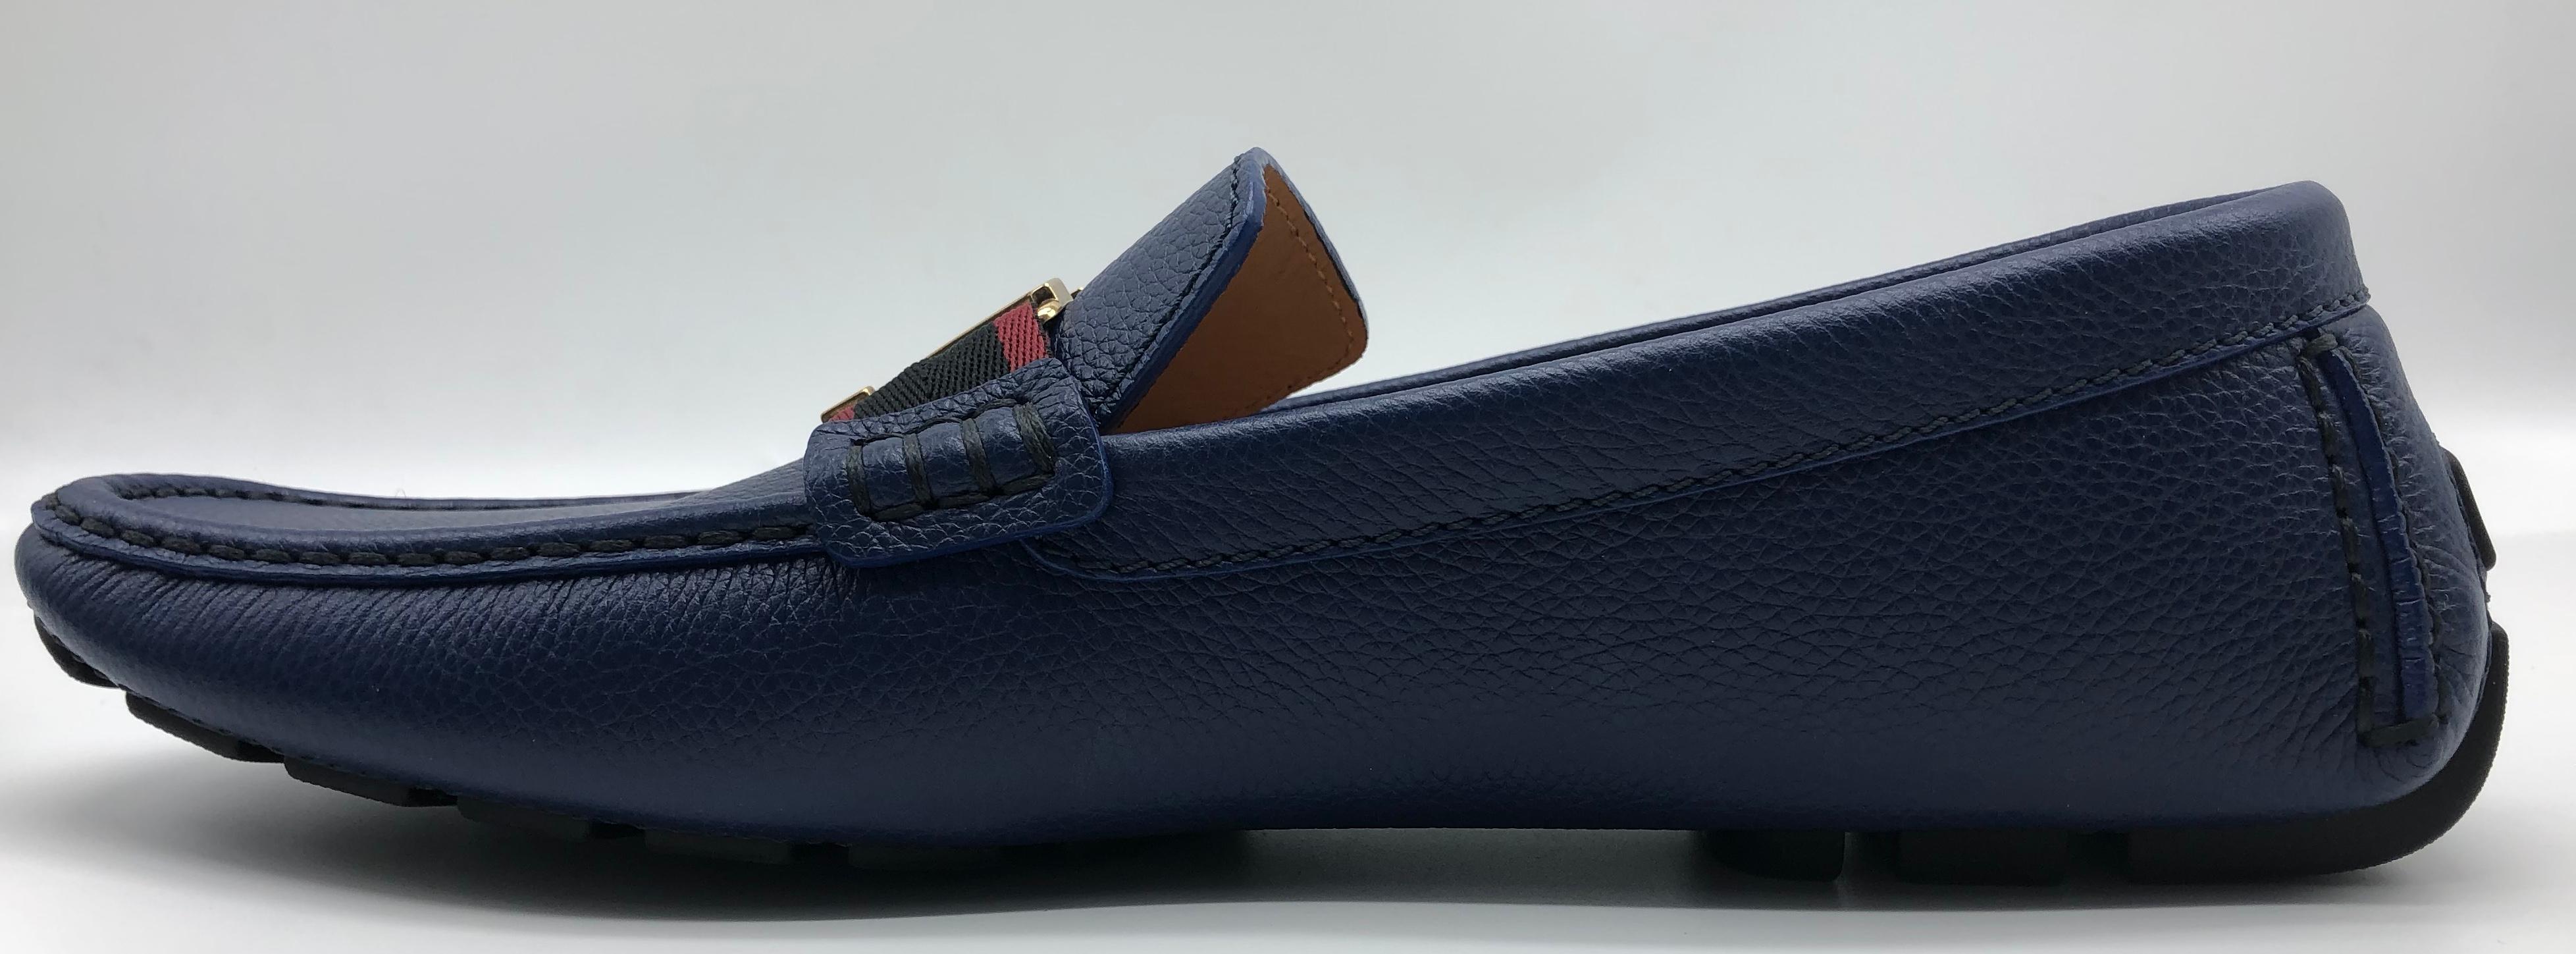 Louis Vuitton Loafers in blue navy leather. 
Model: Monte Carlo 
Size : 8 (42) 
Condition: new never worn
Comes with box
